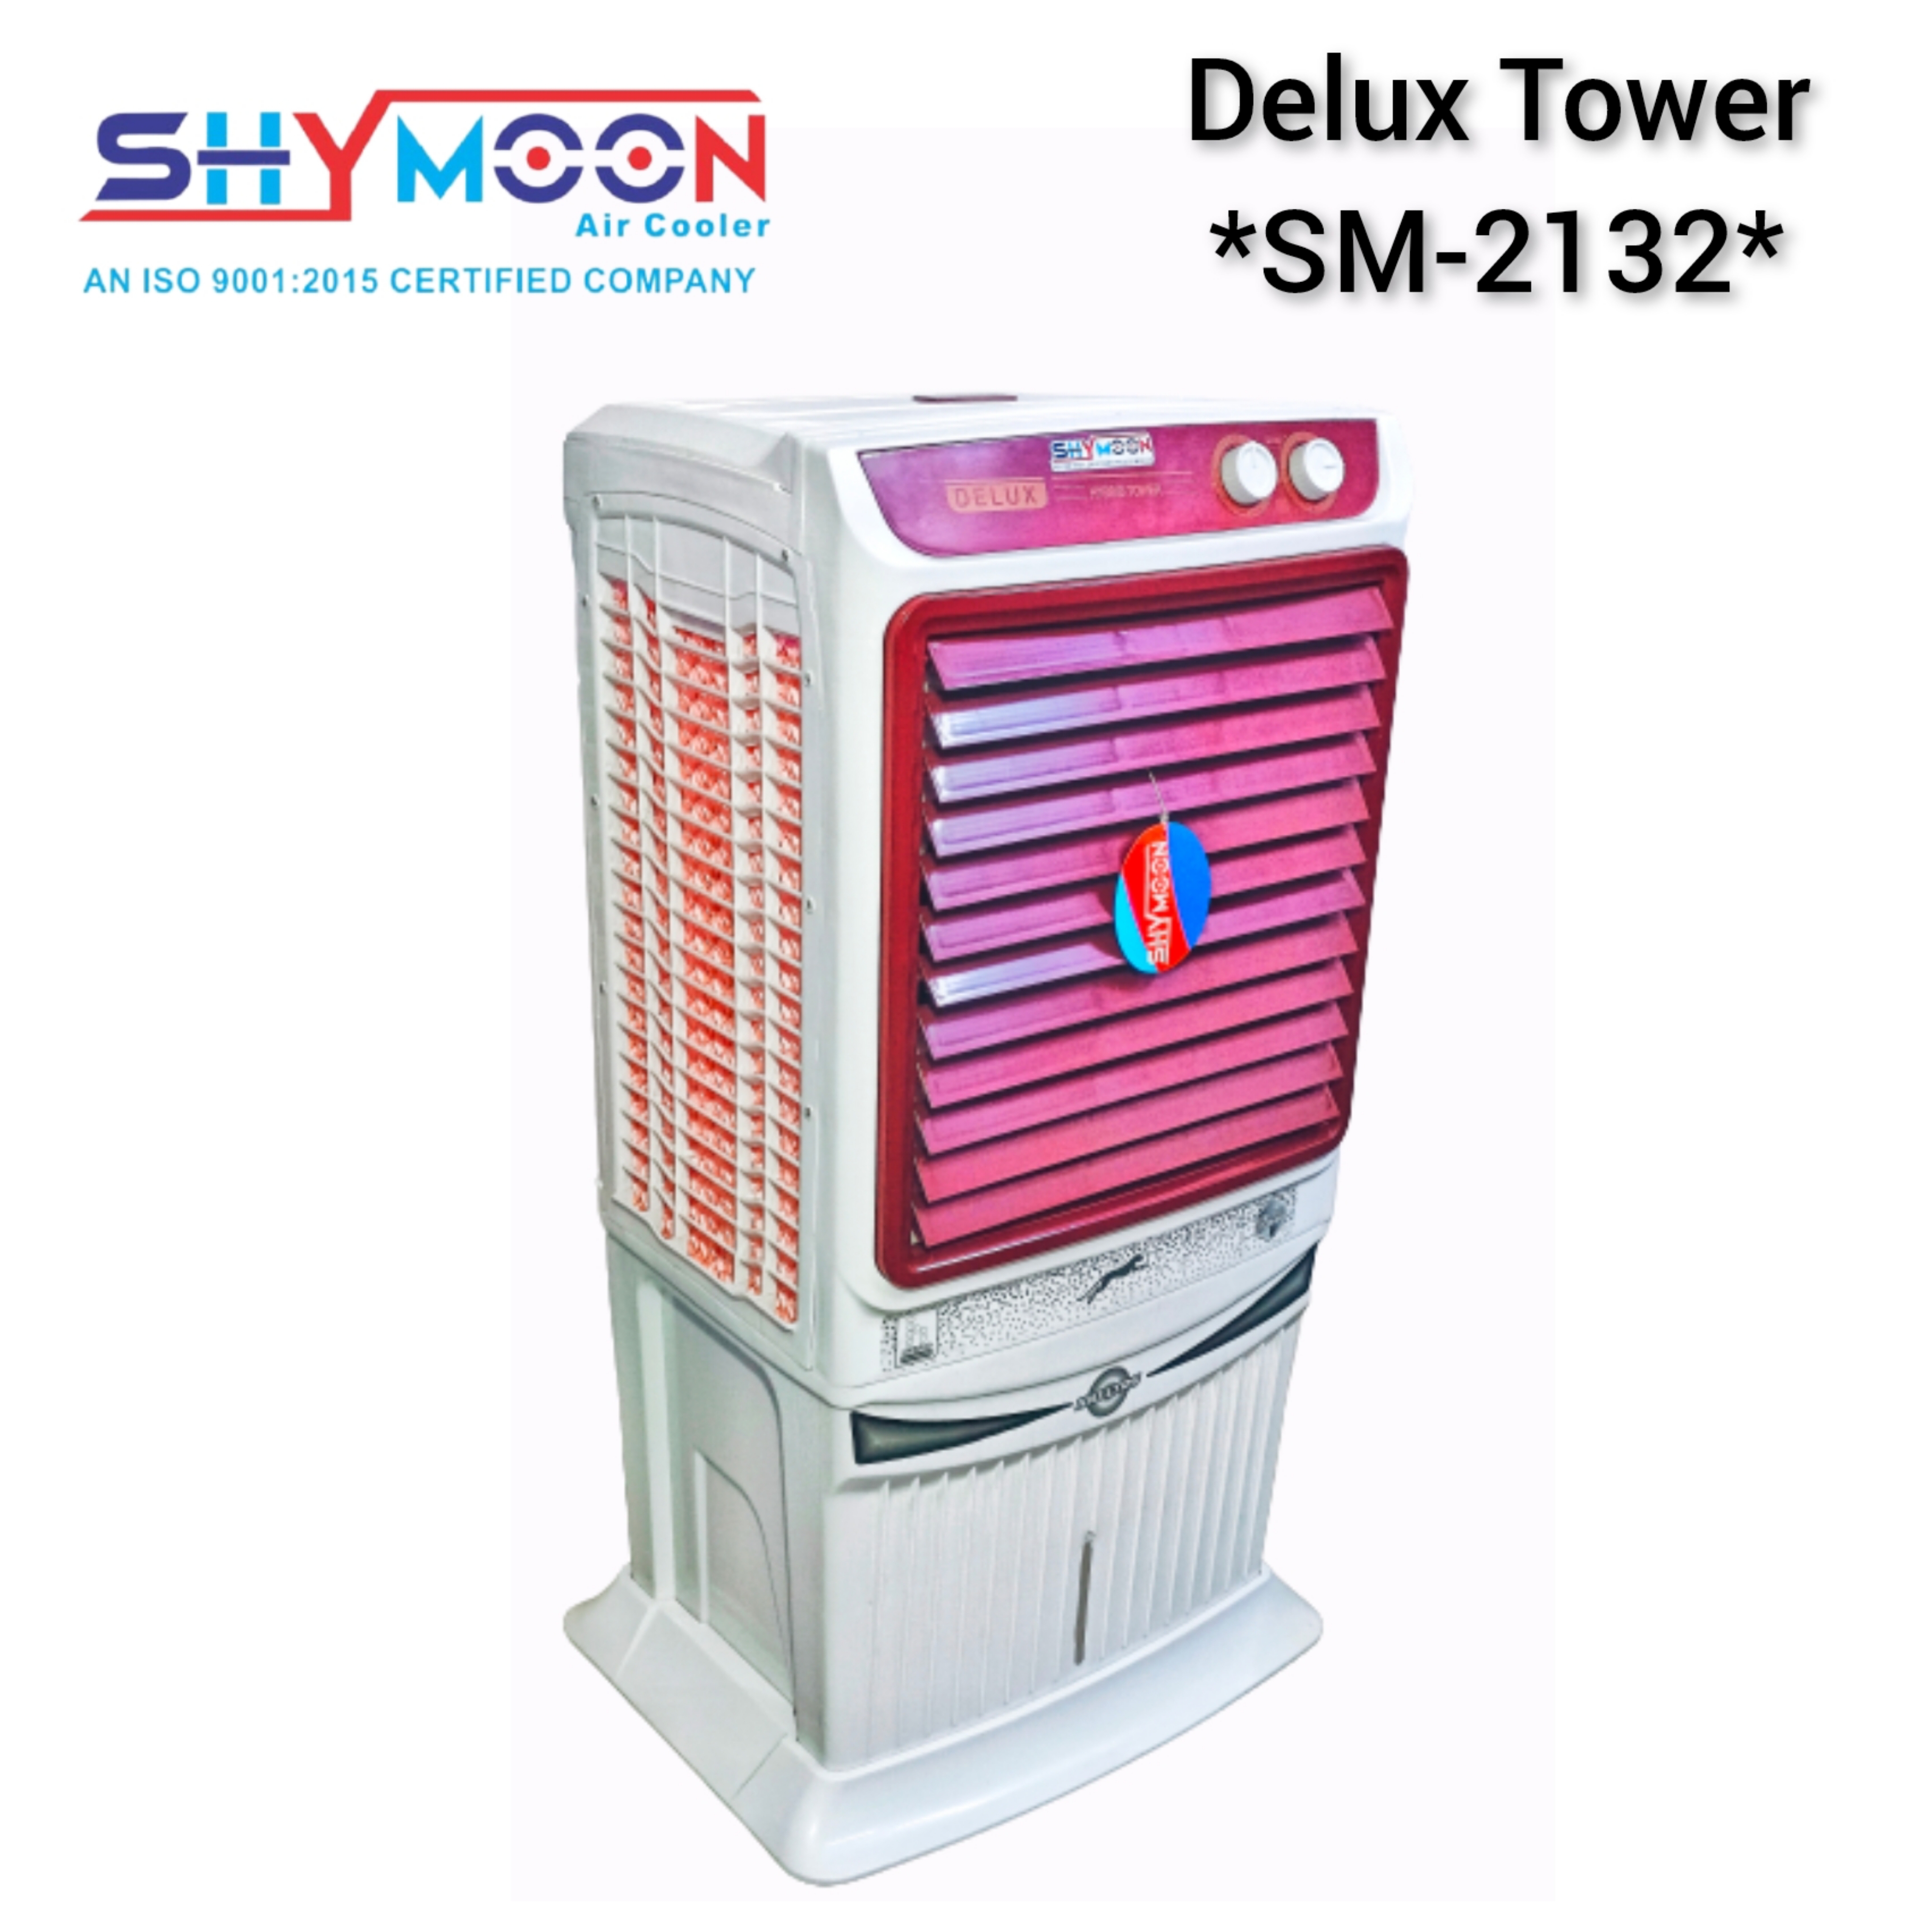 Deluxe Tower Air Cooler